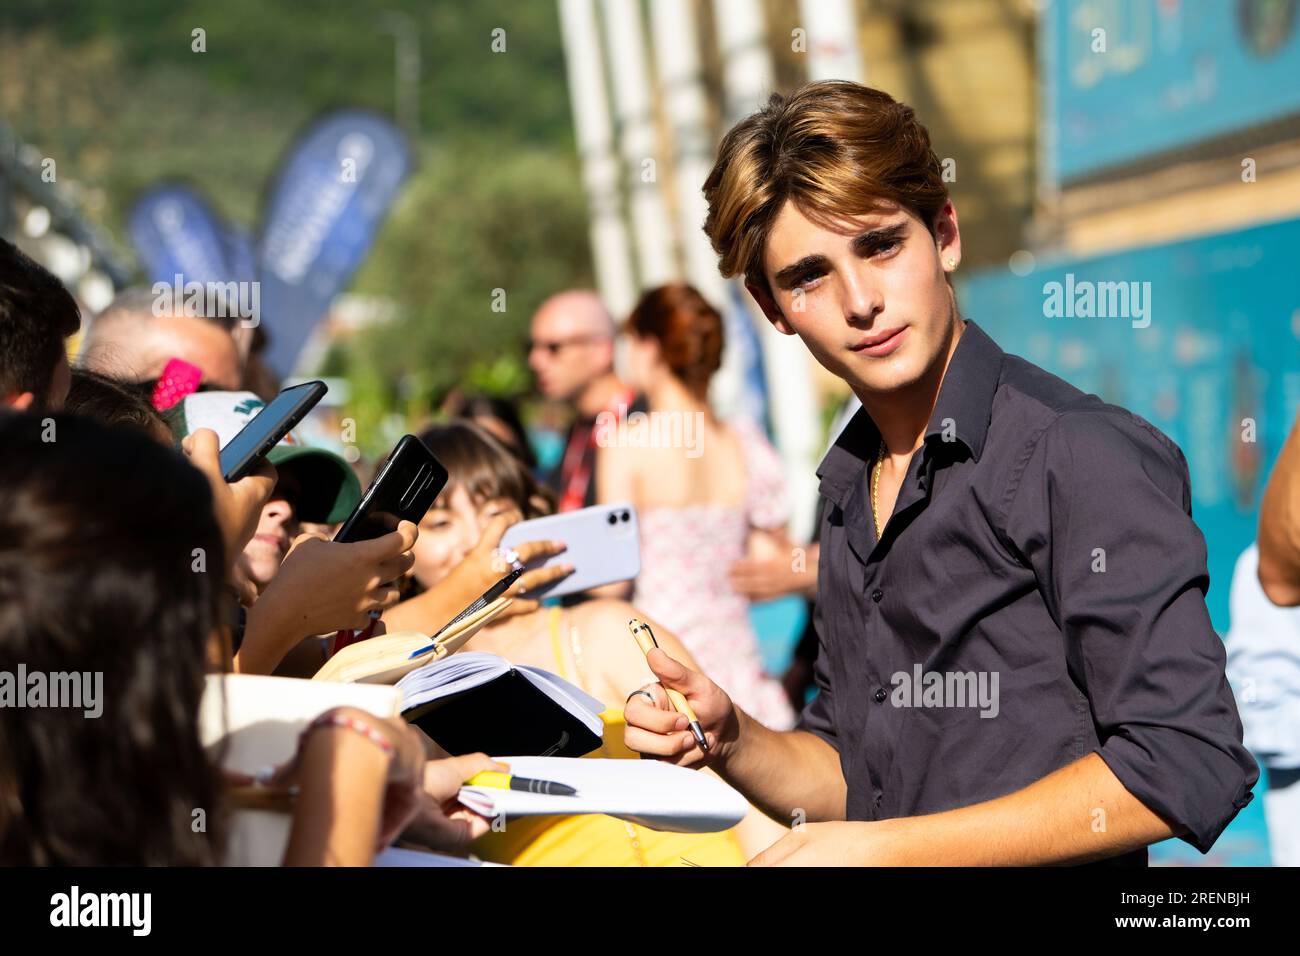 Giffoni Valle Piana, Salerno, Italy. 28th July, 2023. Italian actor Andrea Arru attends the photocall at Giffoni Film Festival 2023 on July 28, 2023 in Giffoni Valle Piana, Salerno, Italy (Credit Image: © Francesco Luciano/ZUMA Press Wire) EDITORIAL USAGE ONLY! Not for Commercial USAGE! Stock Photo